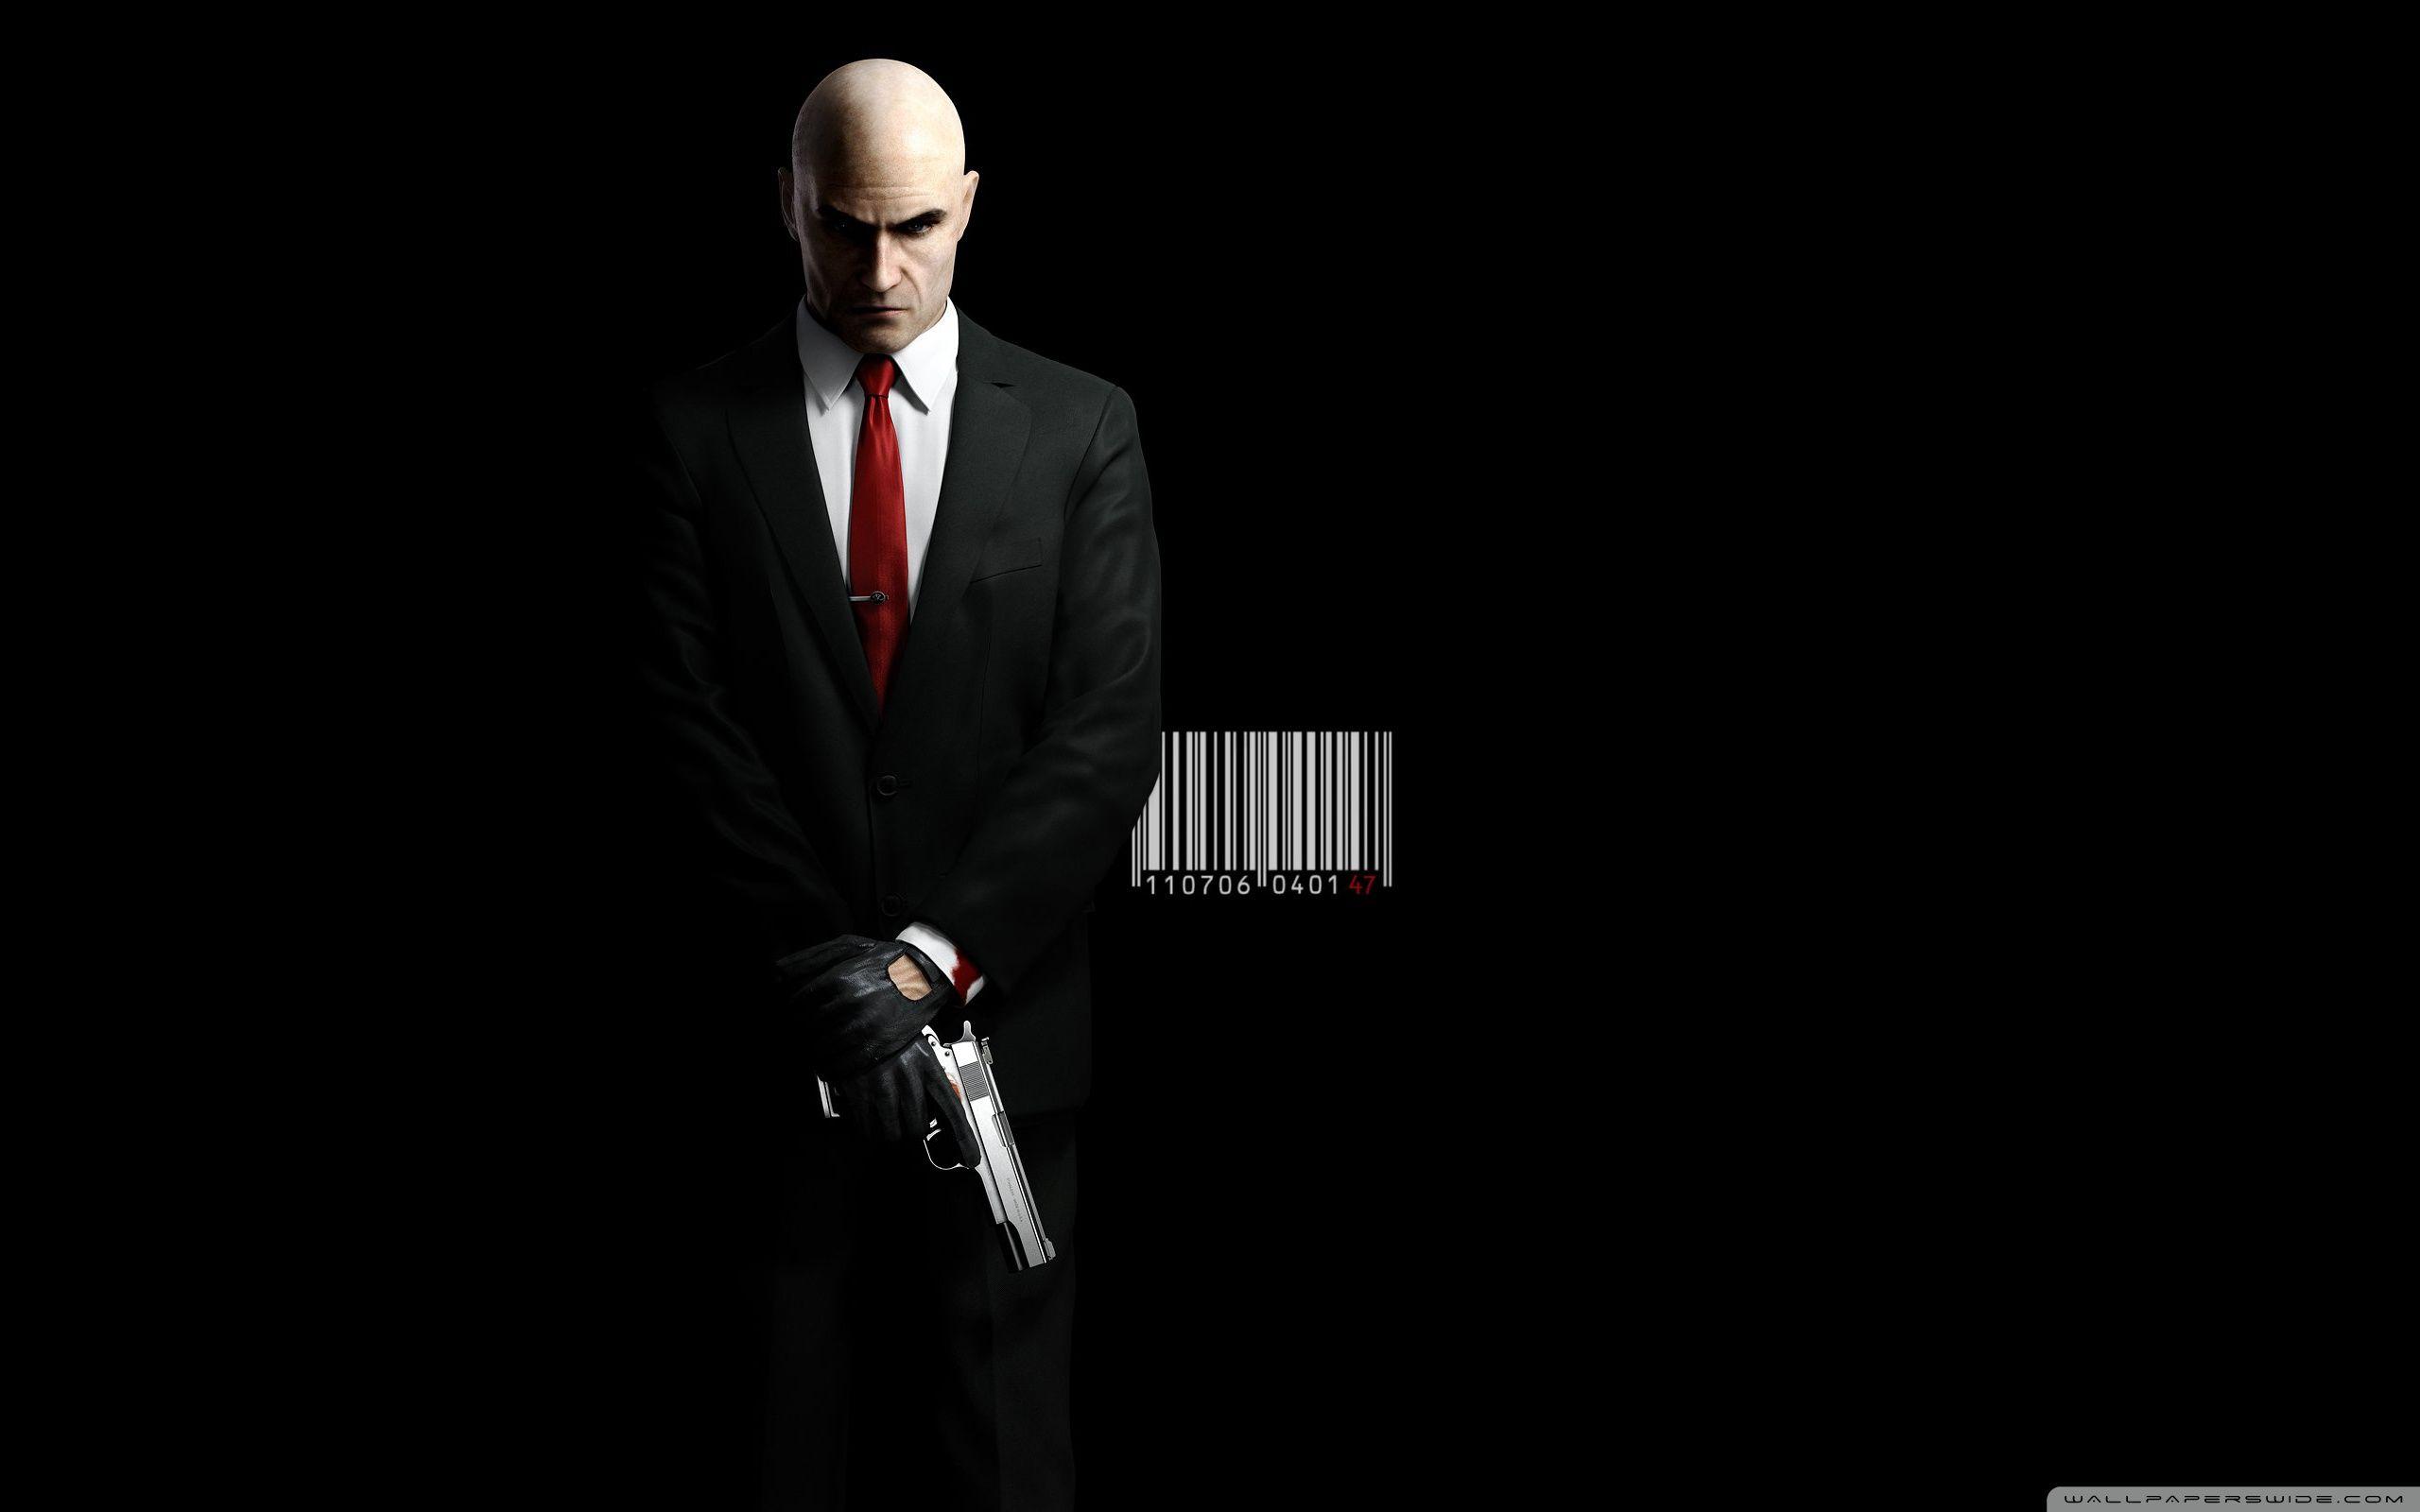 HD wallpaper Anonymous Art black formal suit clip art Computers Others   Wallpaper Flare